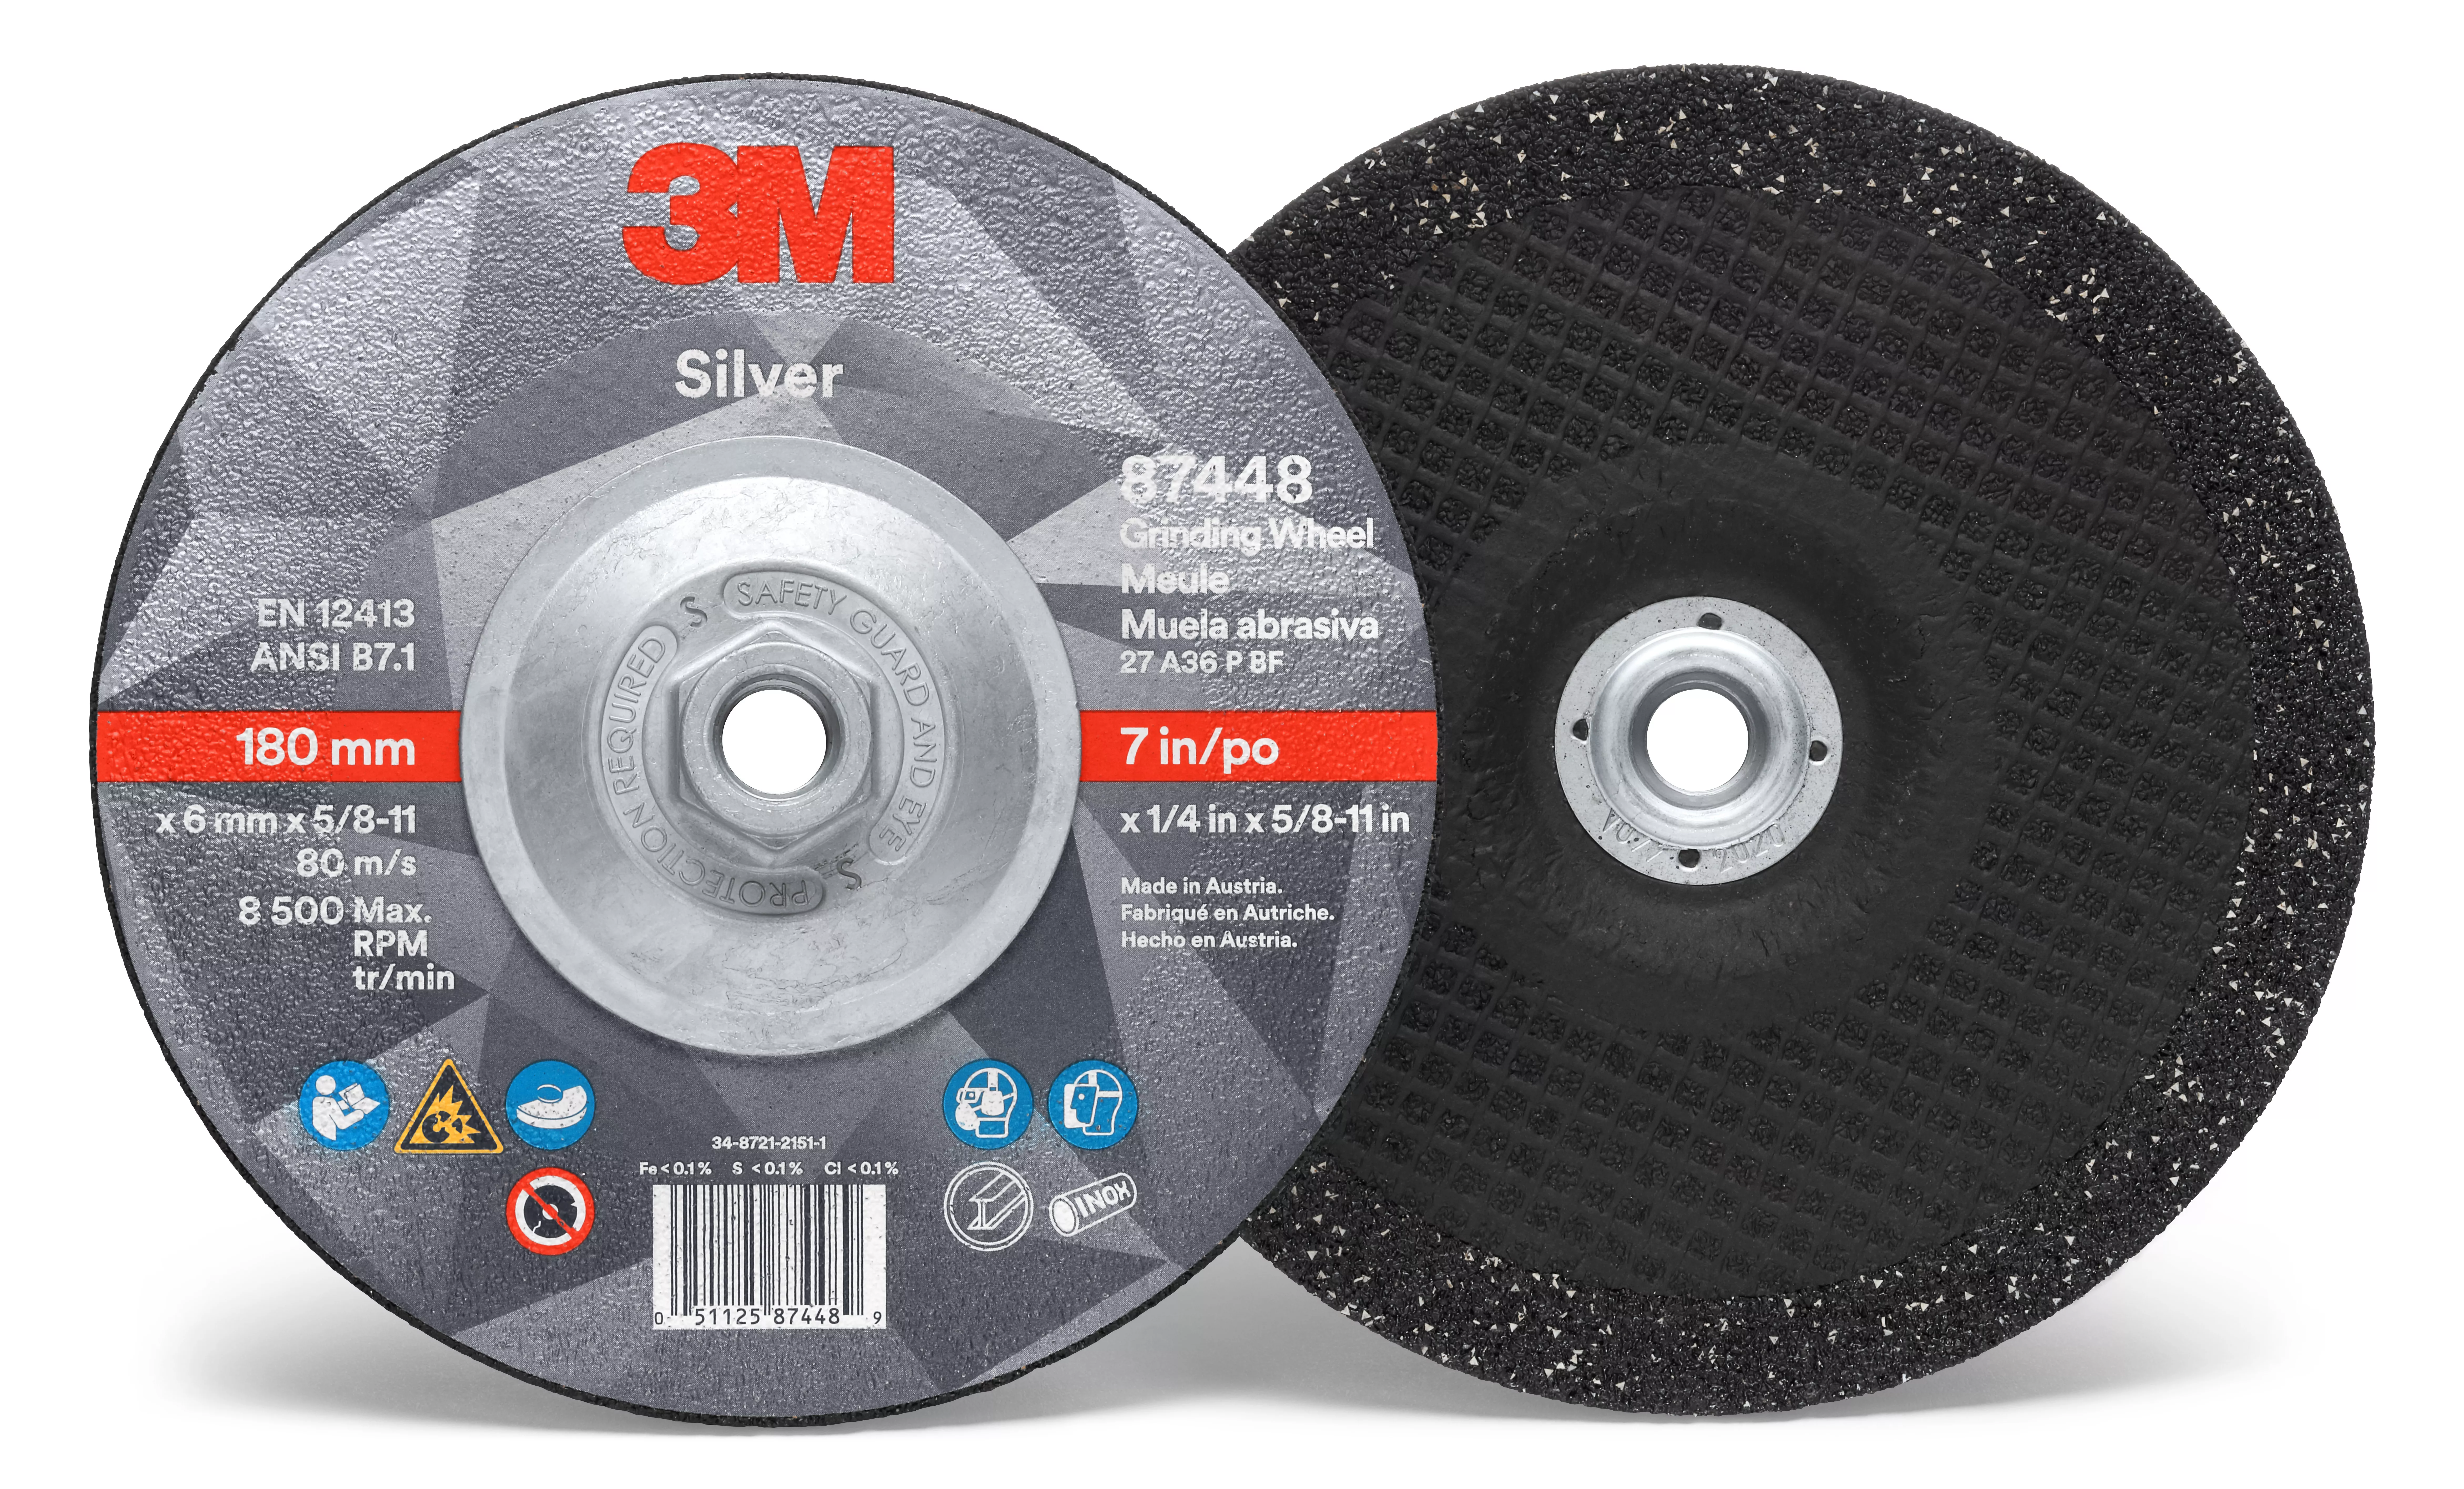 3M™ Silver Depressed Center Grinding Wheel, 87448, T27 Quick Change, 7
in x 1/4 in x 5/8 in-11 in, 10/Carton, 20 ea/Case